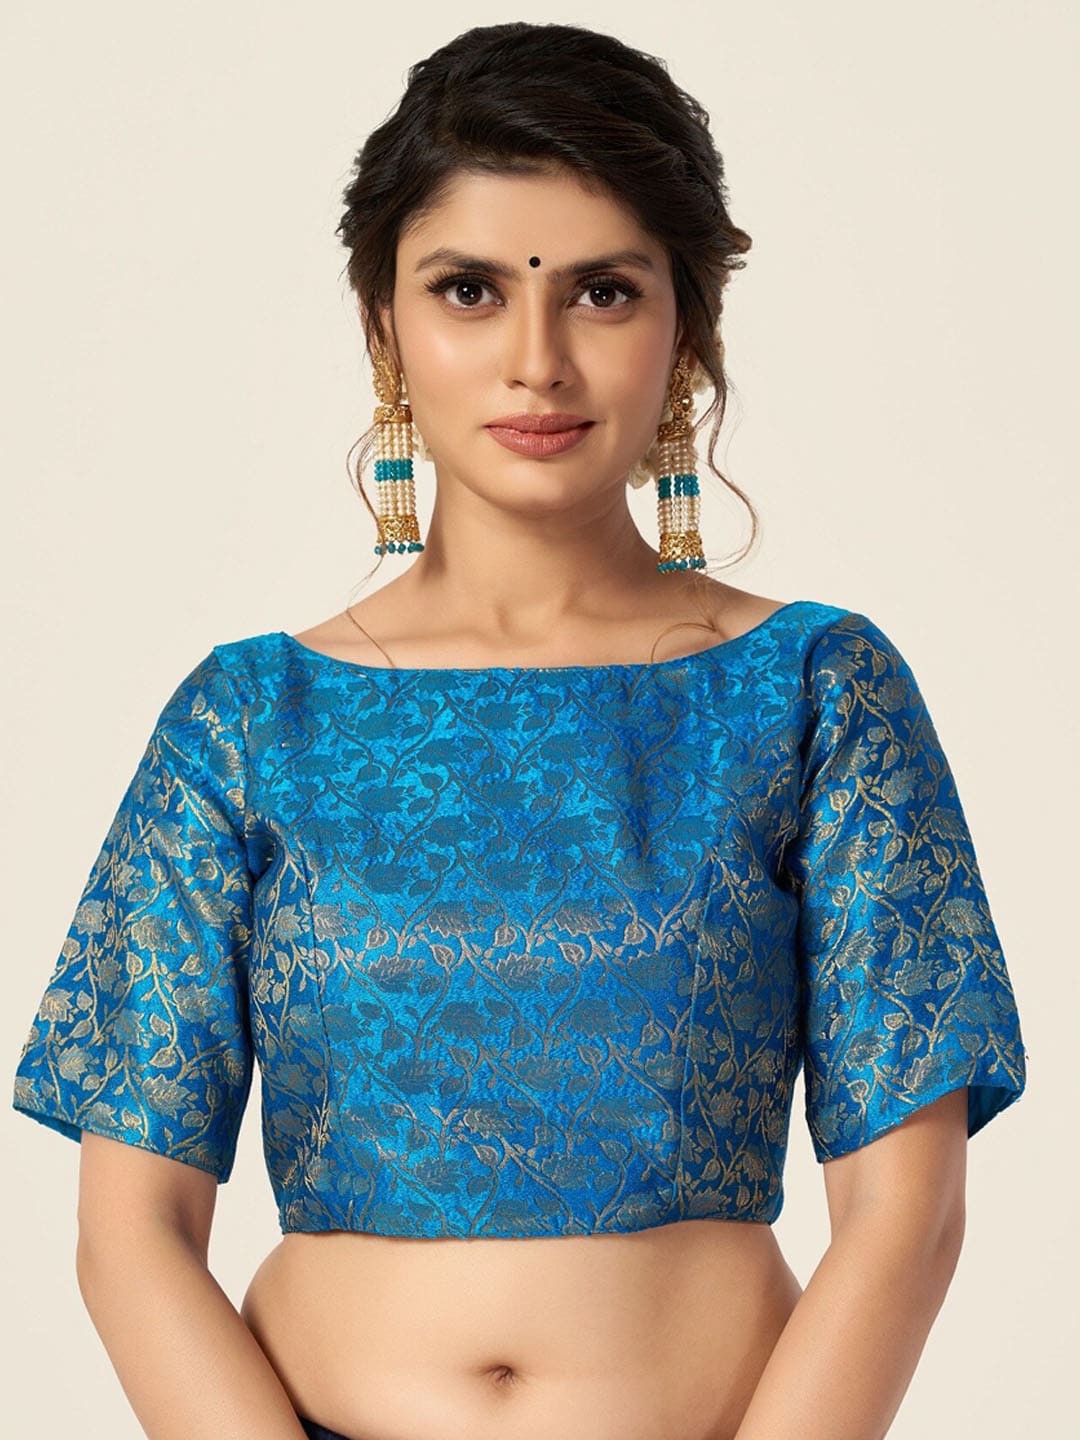 HIMRISE Blue Woven Design Saree Blouse Price in India